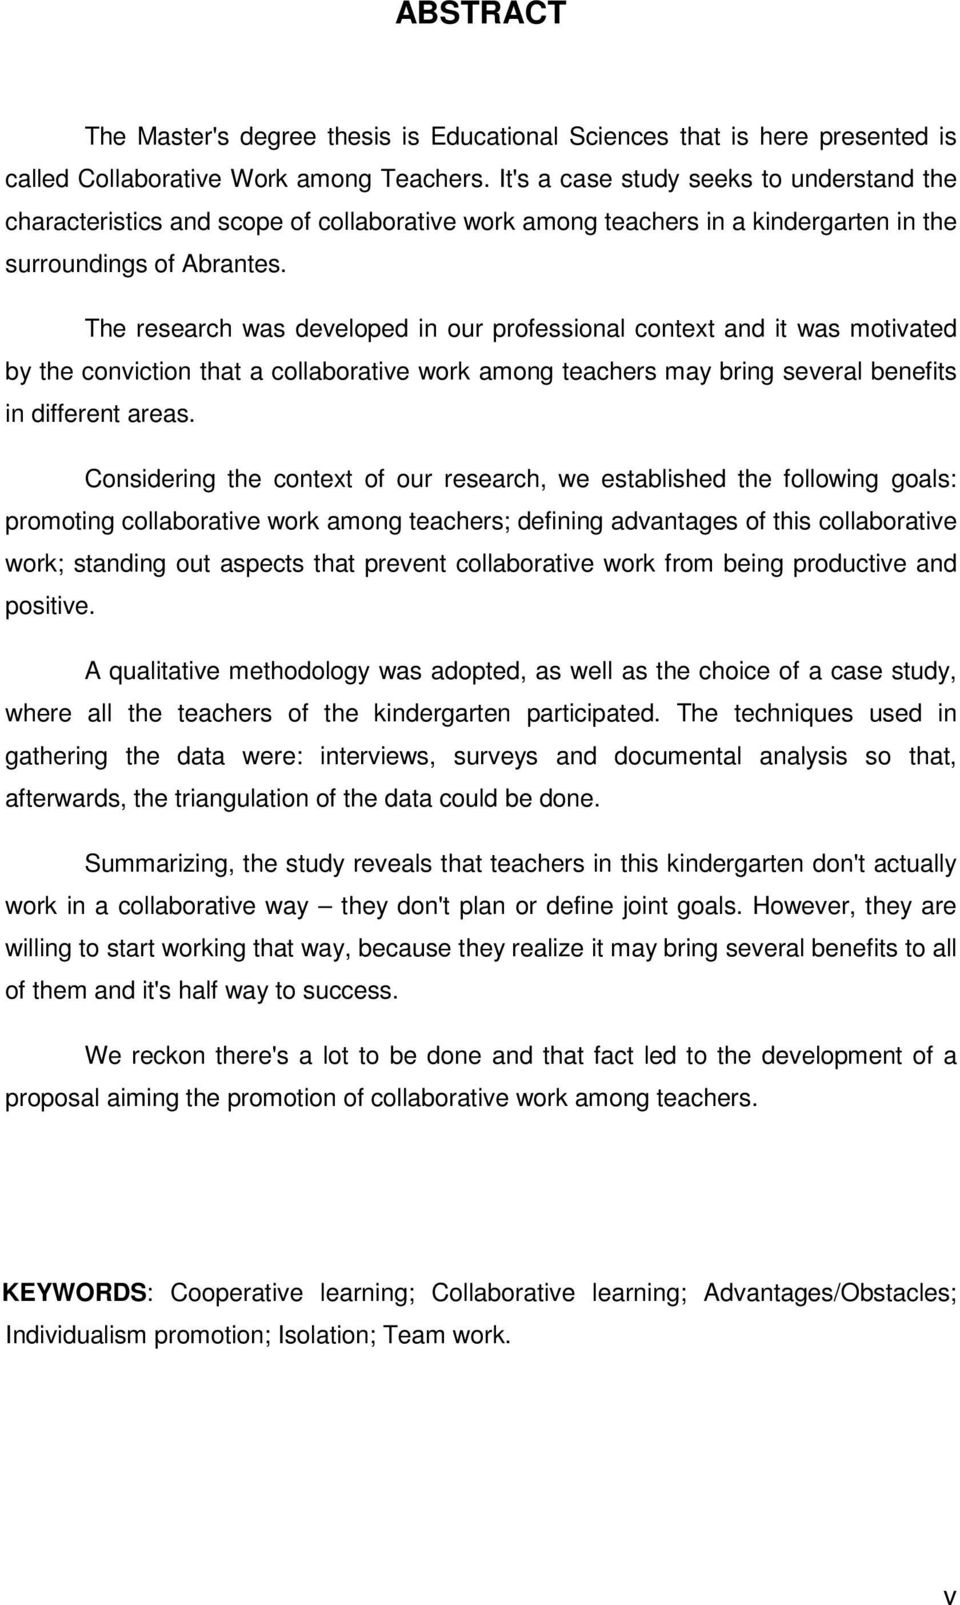 The research was developed in our professional context and it was motivated by the conviction that a collaborative work among teachers may bring several benefits in different areas.